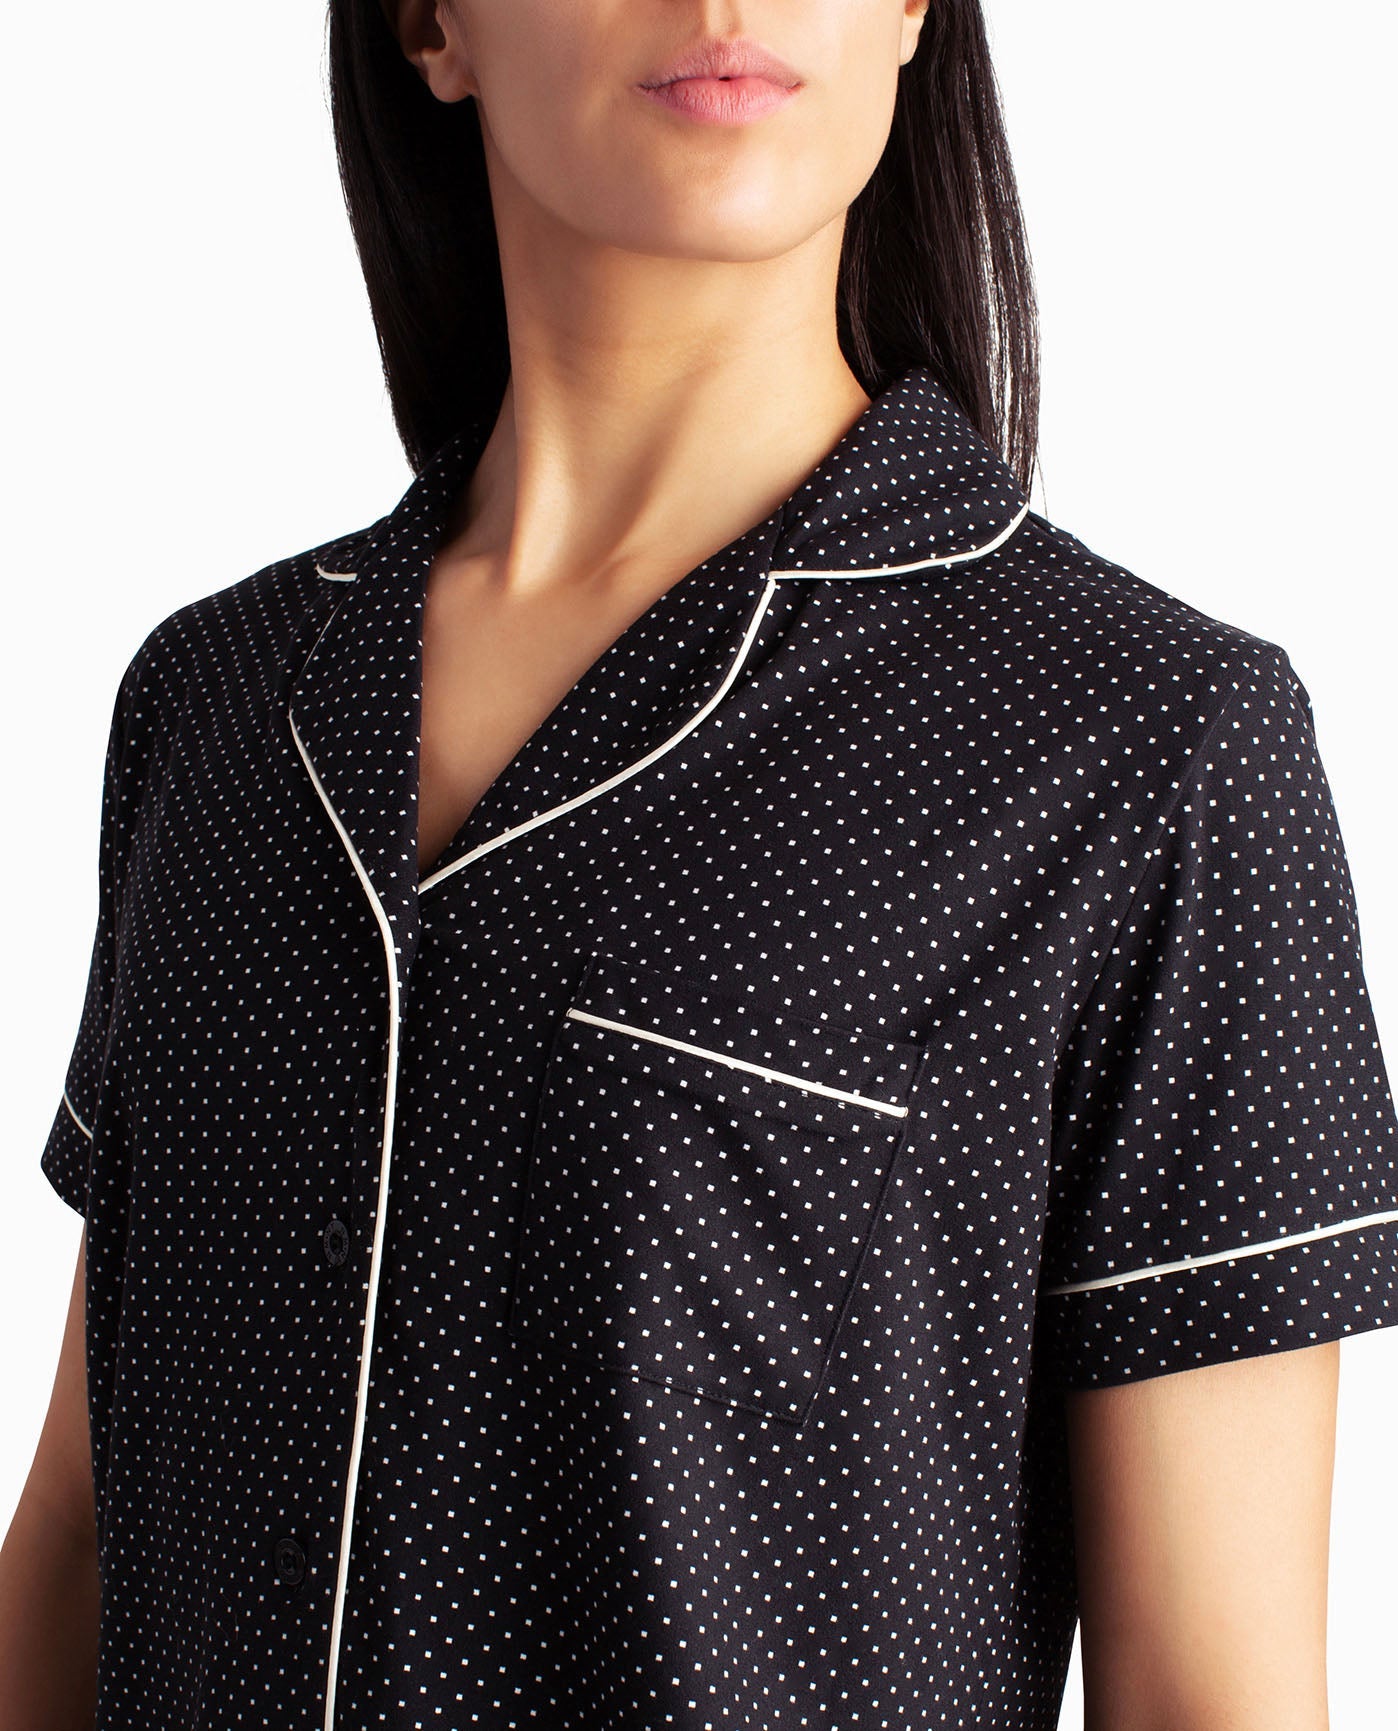 NECKLINE OF PEACHED JERSEY SHIRT AND SHORT TWO-PIECE SLEEPWEAR SET | Black Dot Square